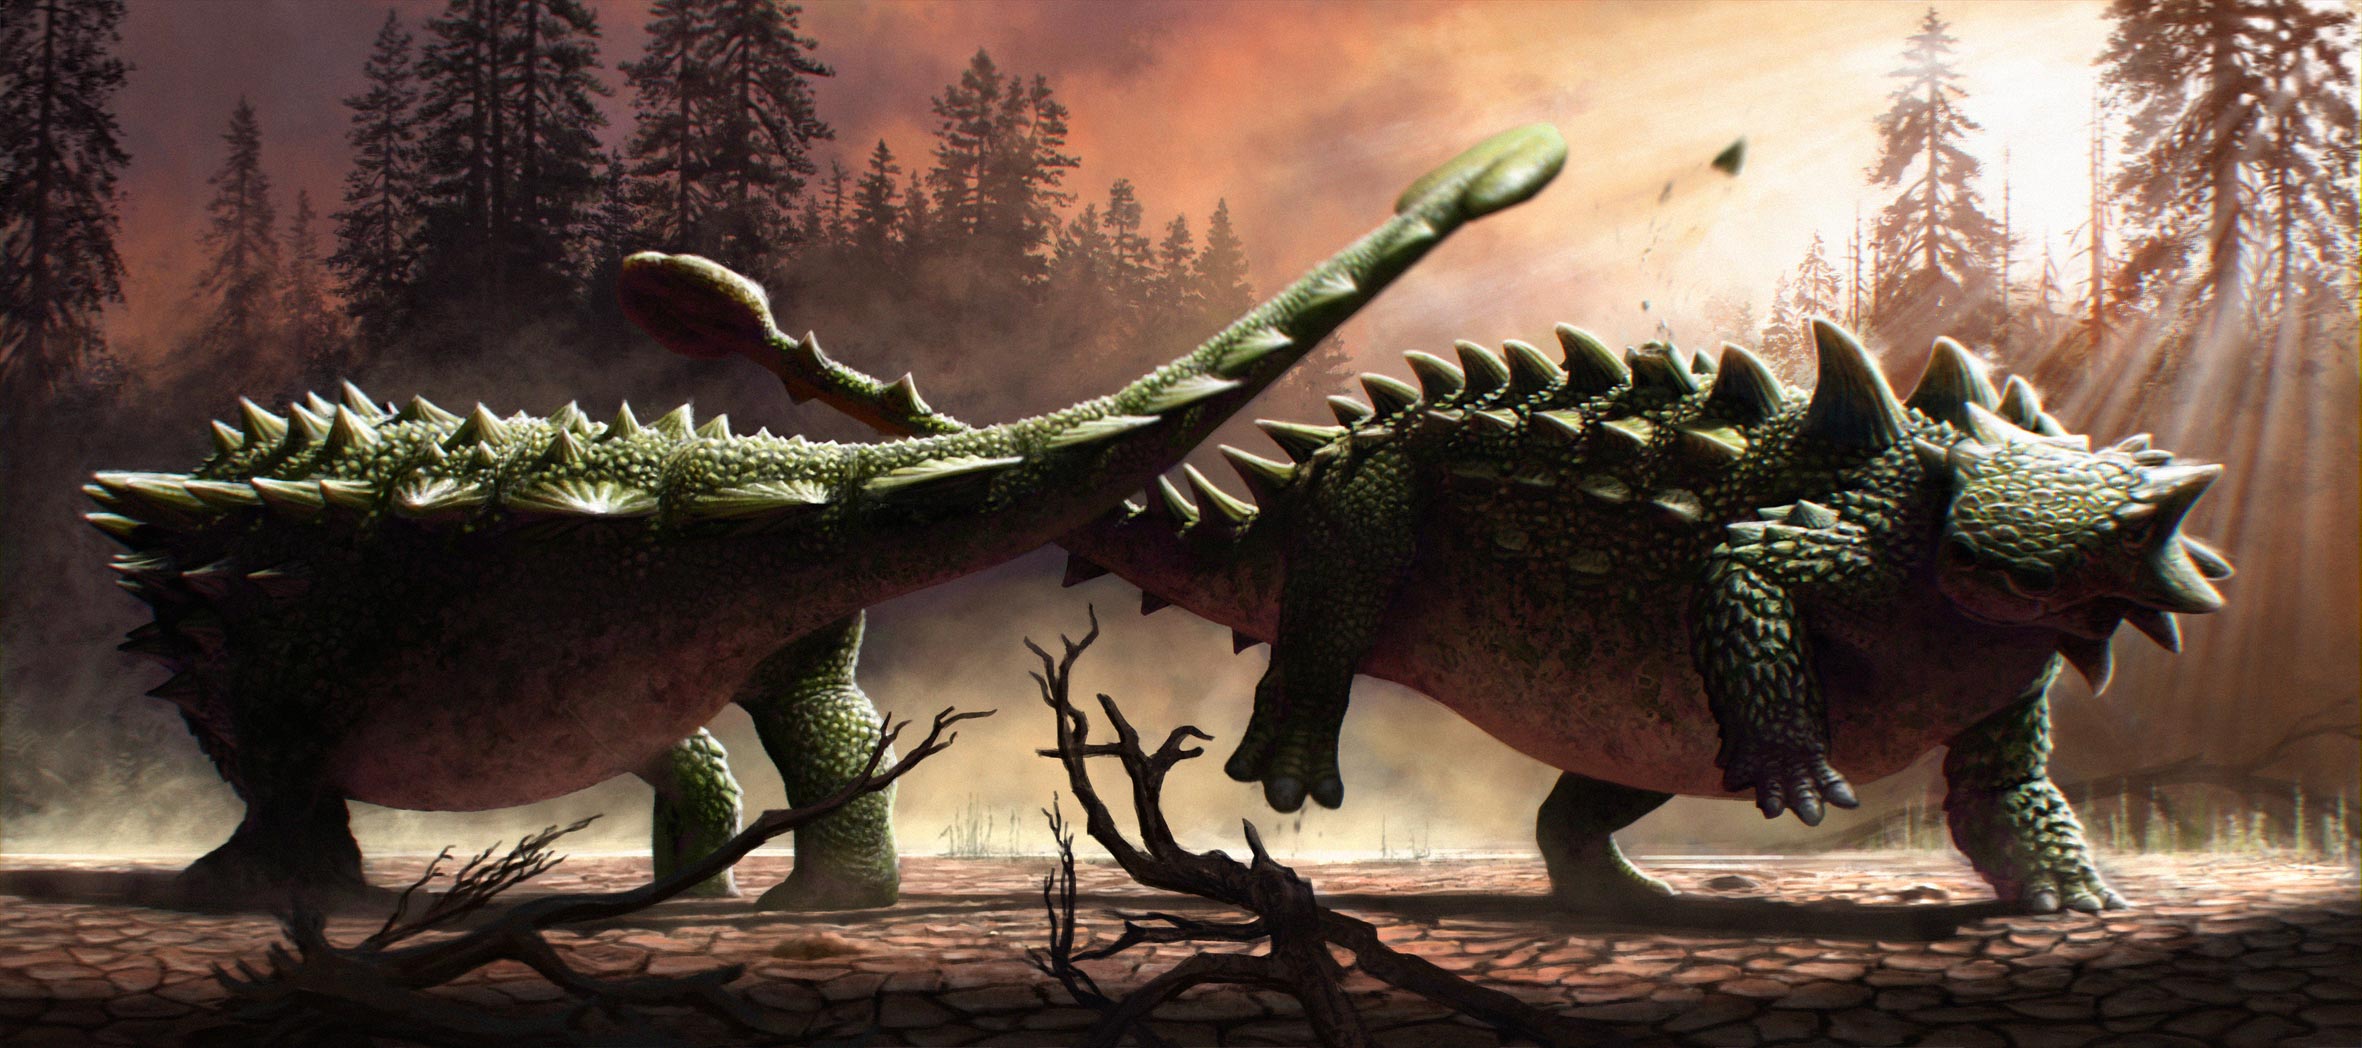 Ankylosaurs Battled Each Other As Much as They Fought Off T. rex | Science